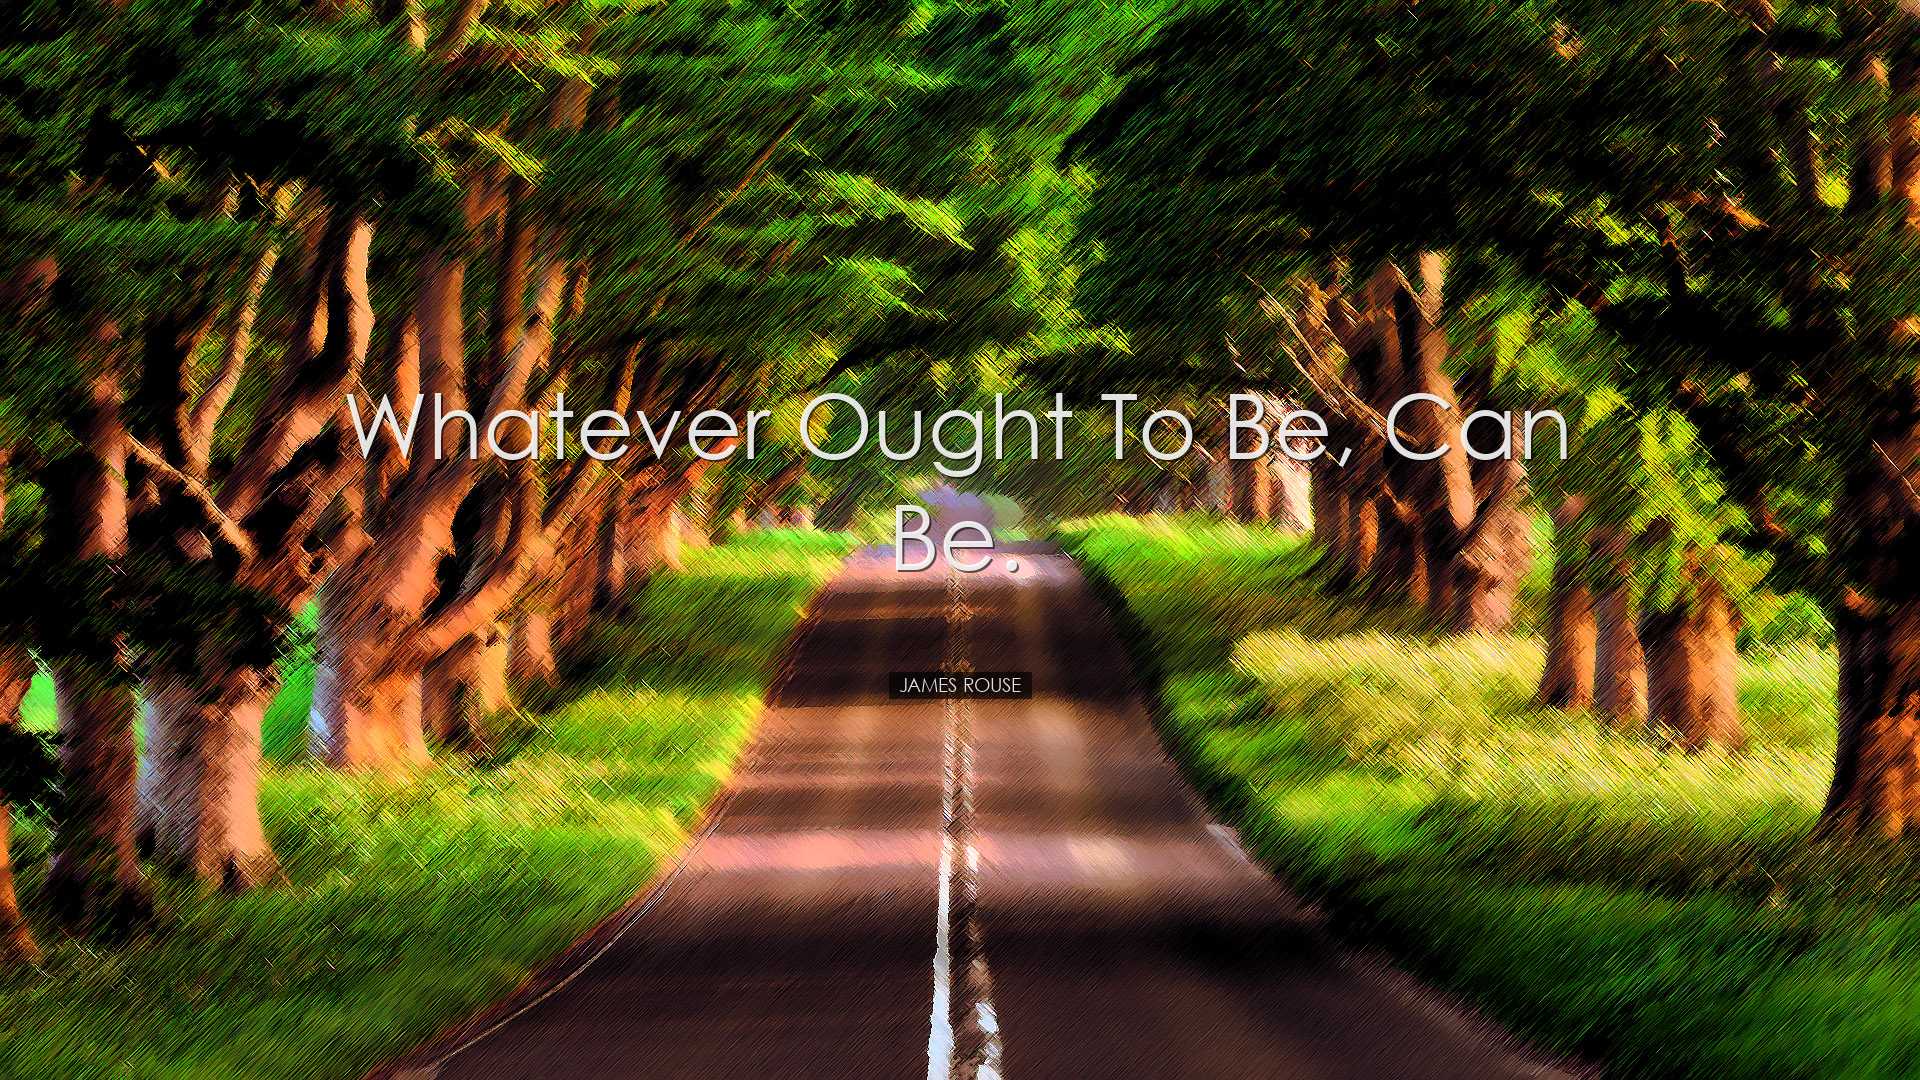 Whatever ought to be, can be. - James Rouse